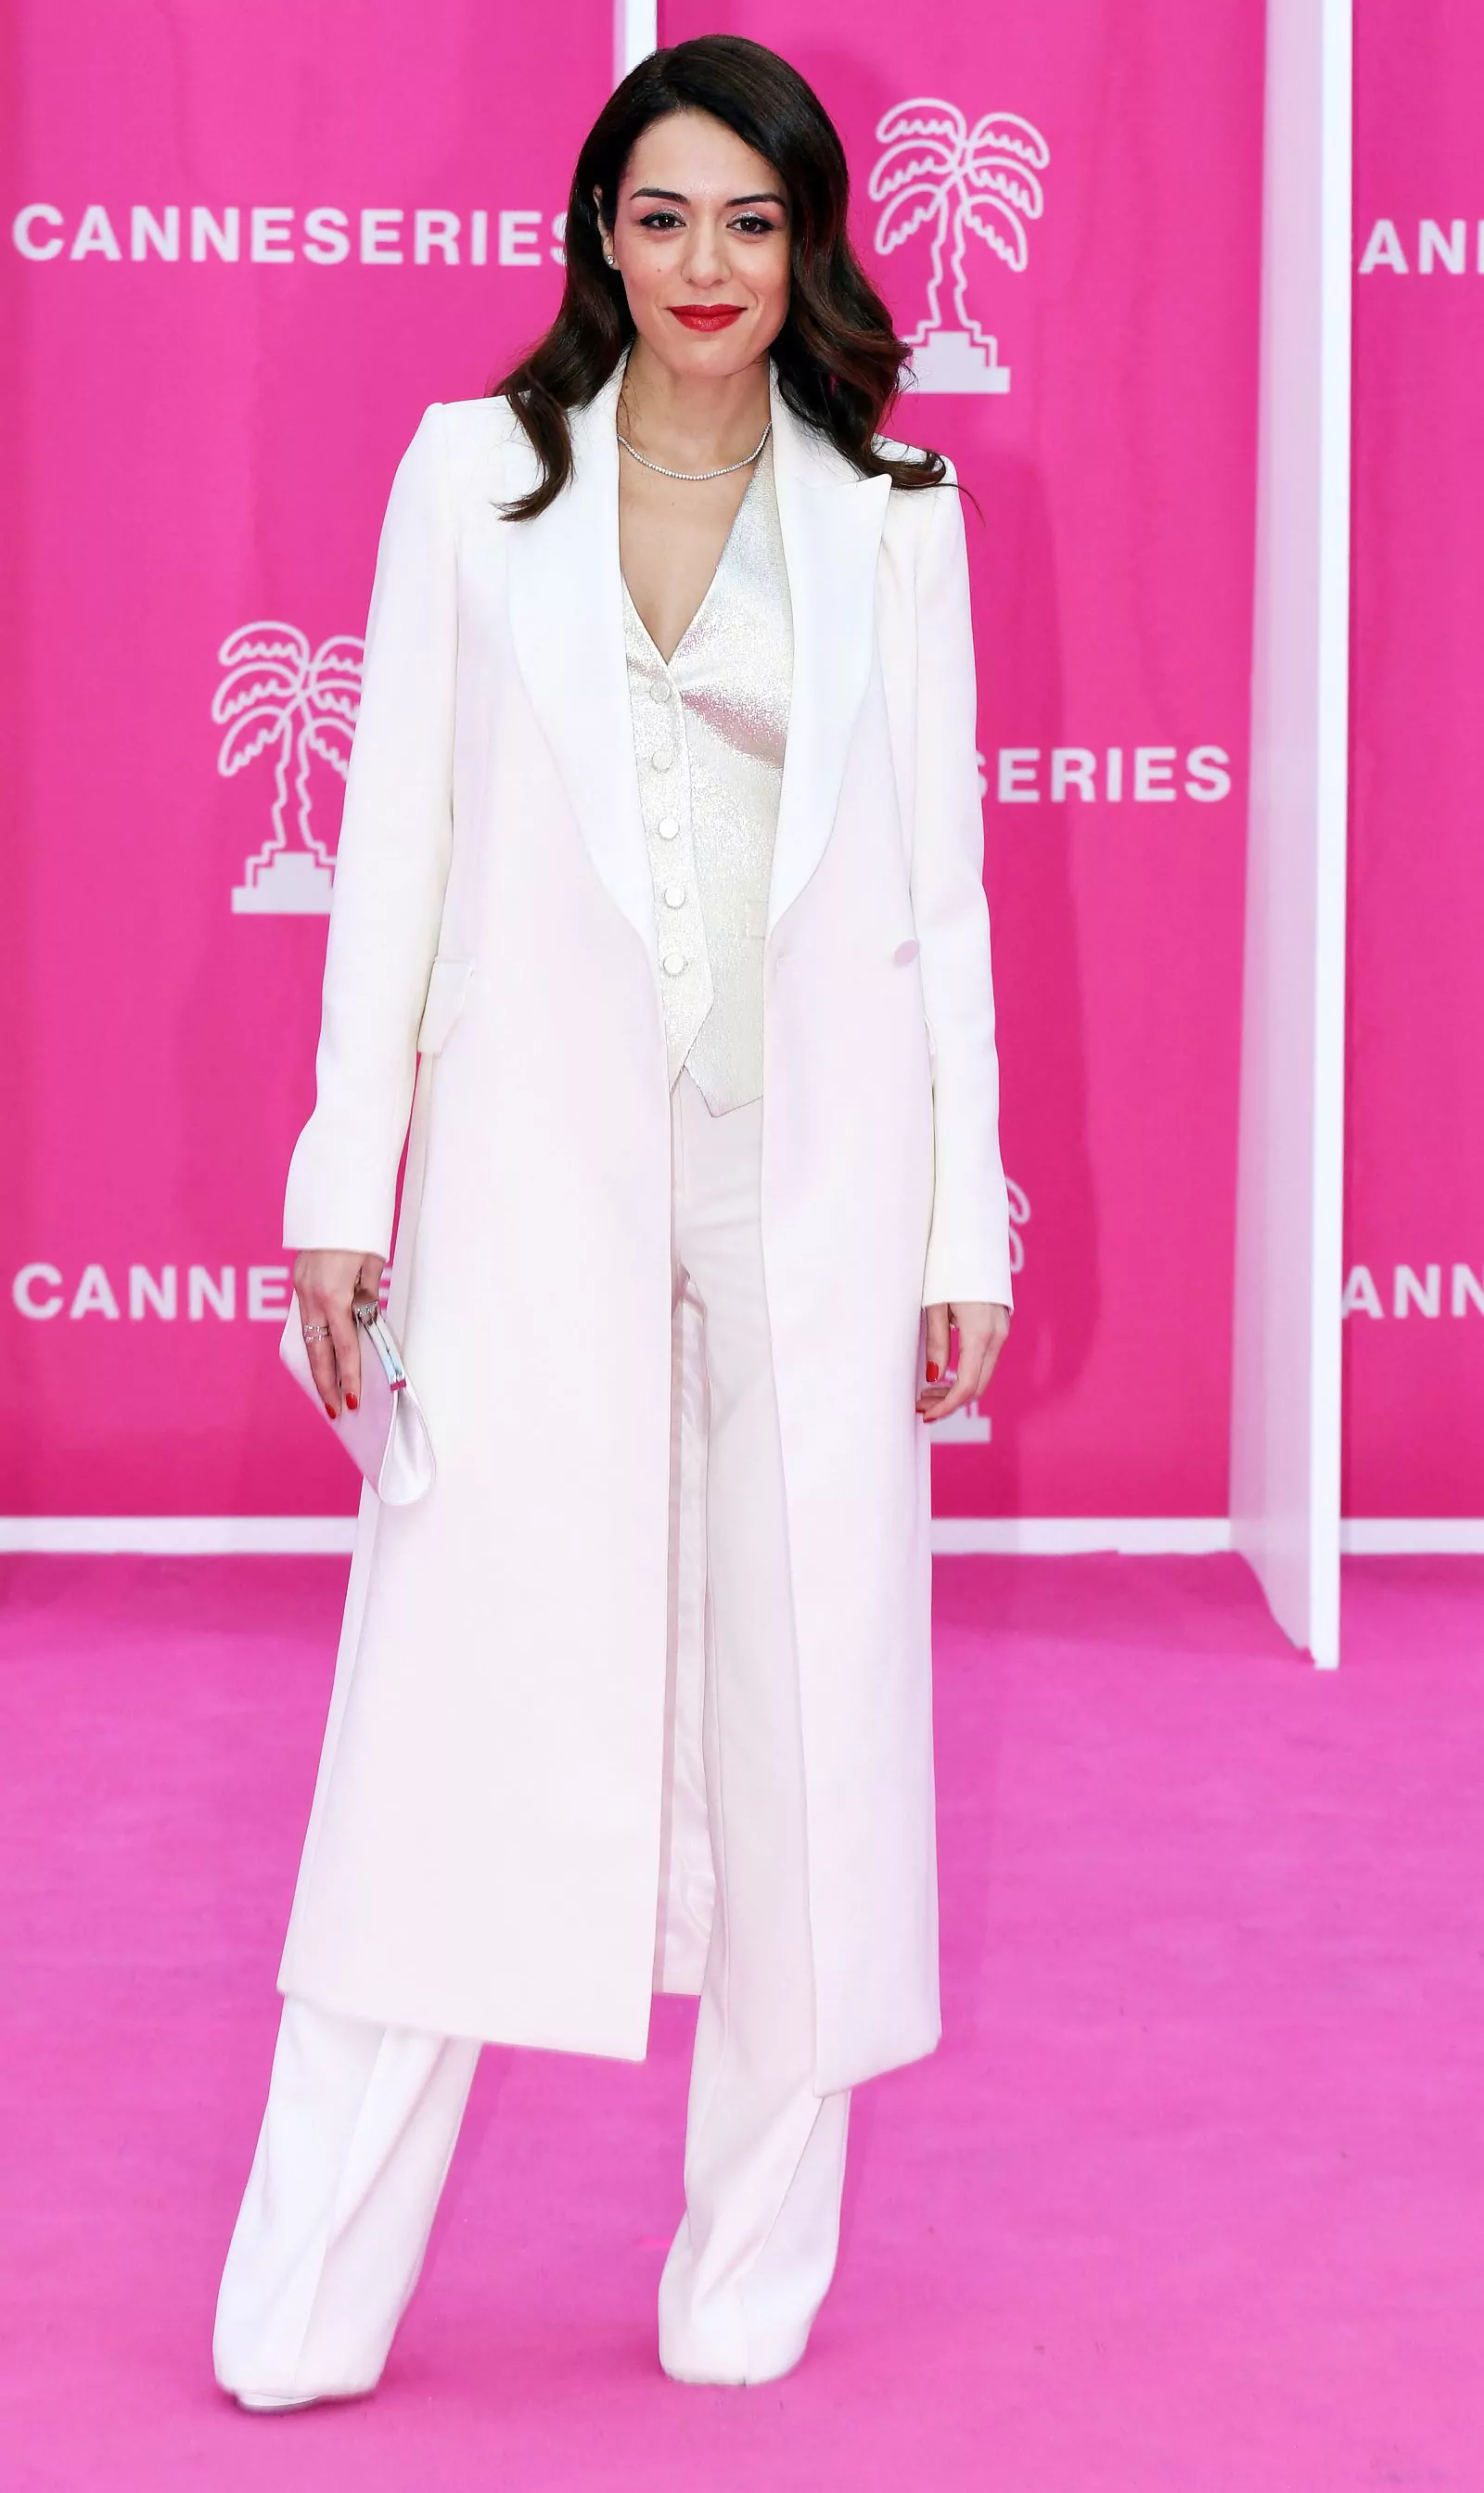 Sofia Essaidi at the 6th Canneseries 2023 International Festival of Series in Cannes, April 14, 2023